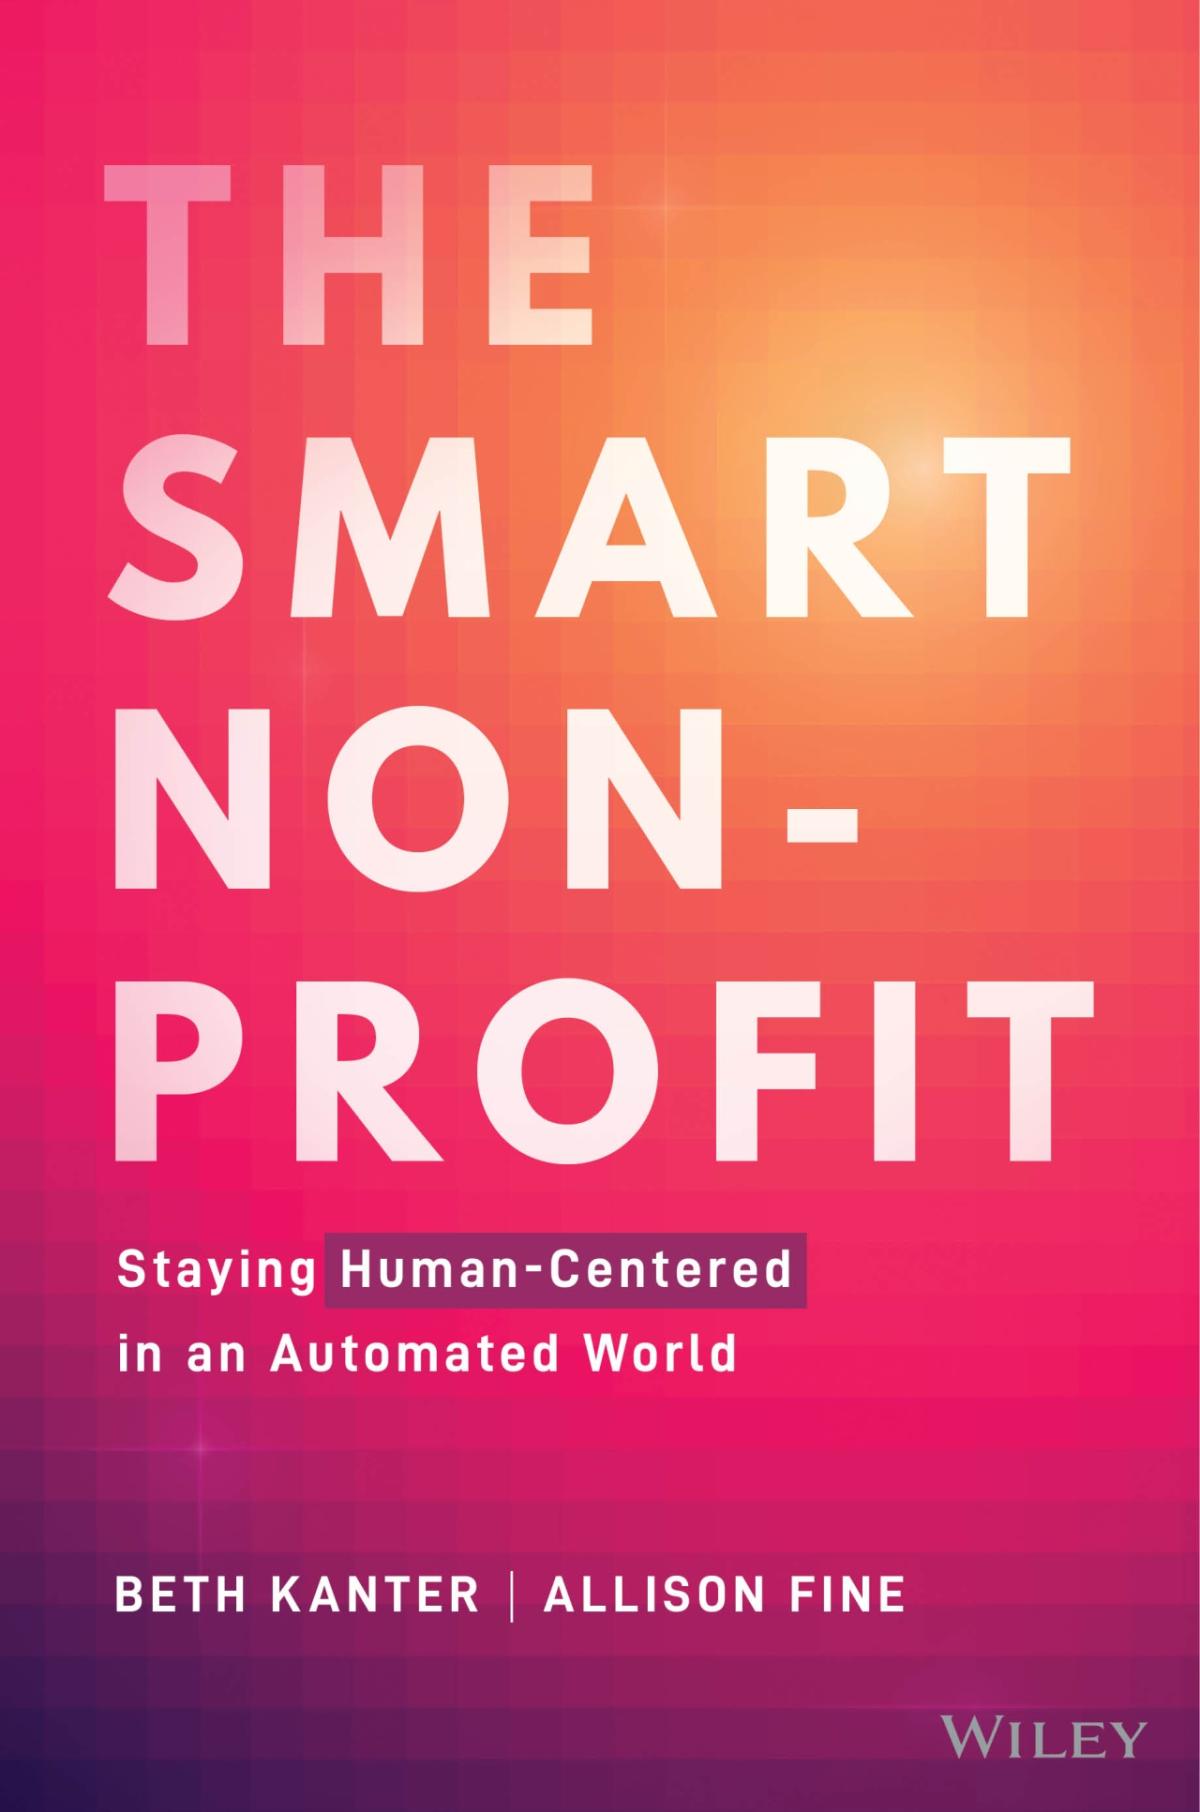 The Smart Nonprofit: Staying Human-Centered in an Age of Automation, by Beth Kanter & Allison Fine